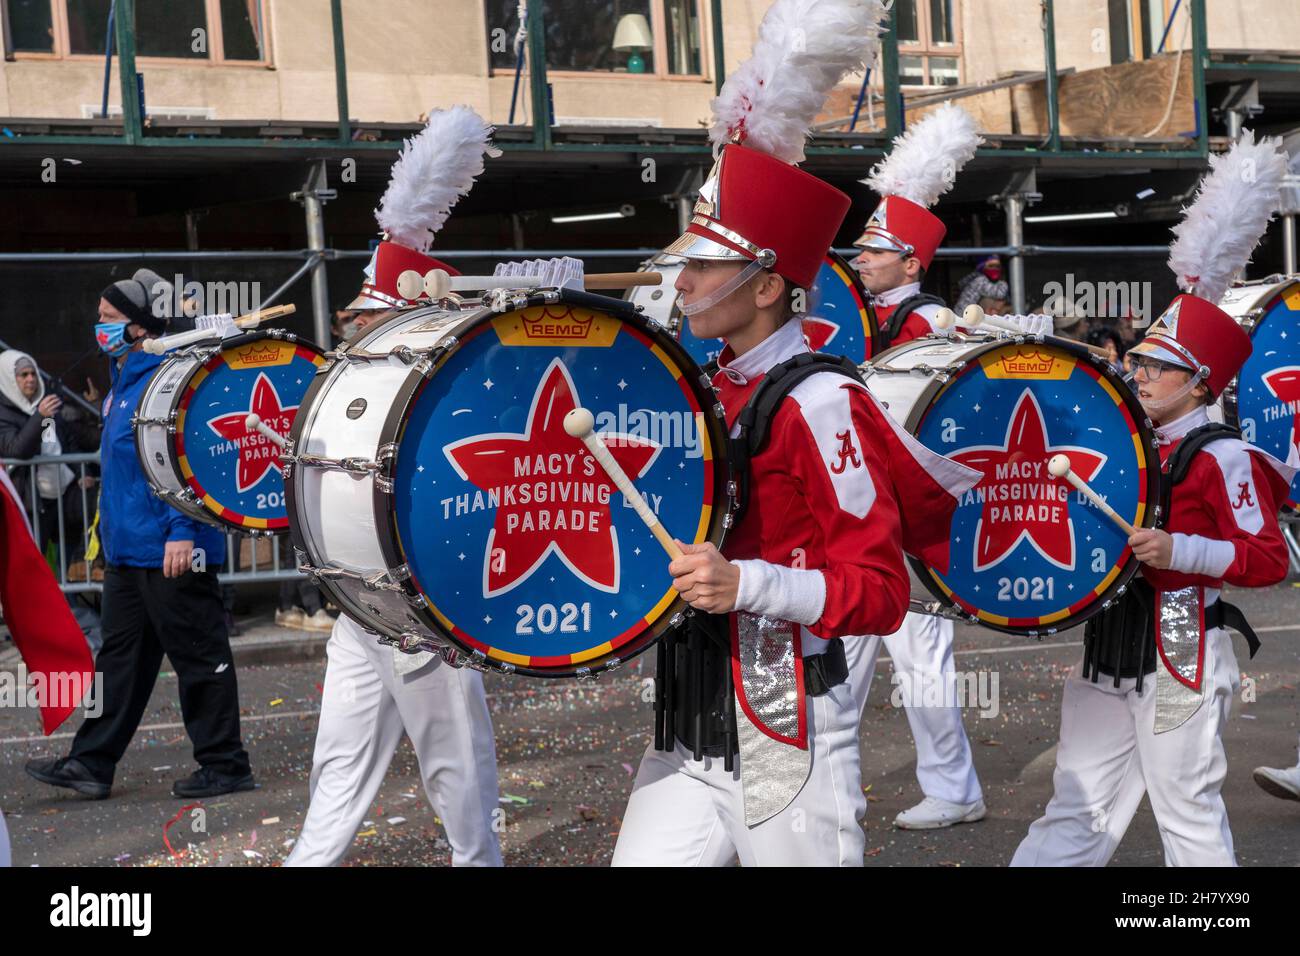 New York, United States. 25th Nov, 2021. The University of Alabama Marching Band from Tuscaloosa, perform at the 95th Annual Macy's Thanksgiving Day Parade in New York City. Credit: SOPA Images Limited/Alamy Live News Stock Photo